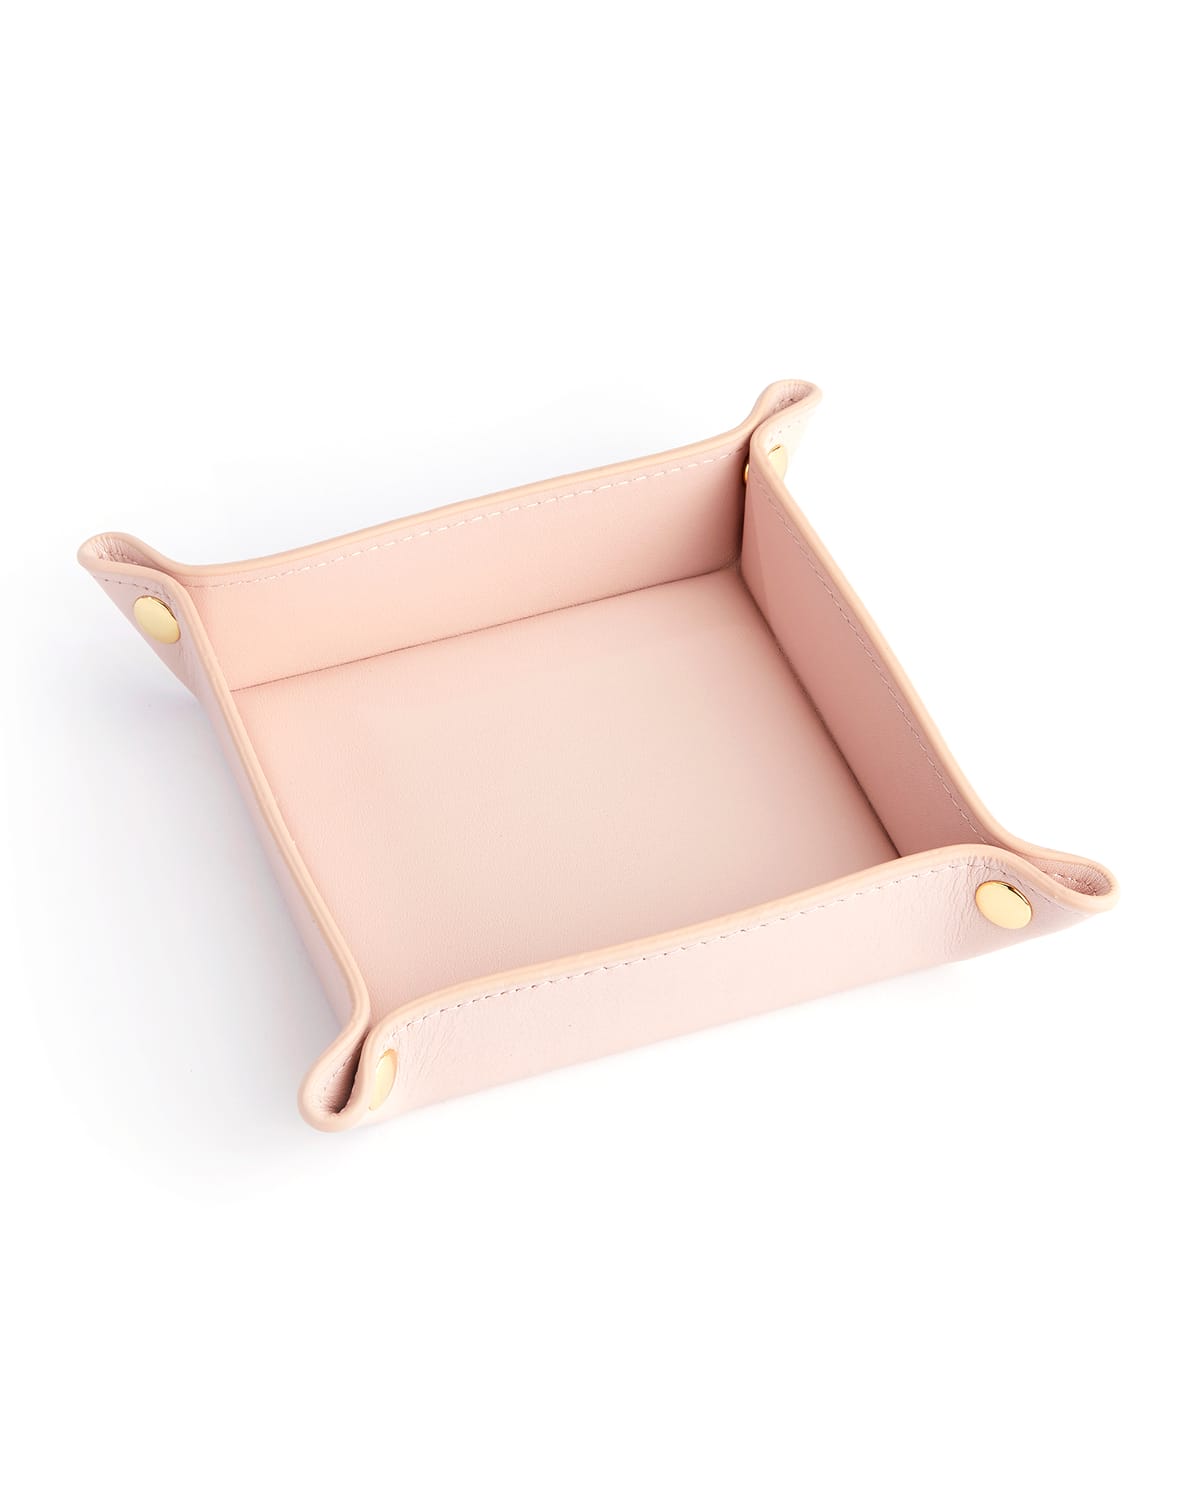 Royce New York Travel Leather Catchall Valet Tray In Light Pink